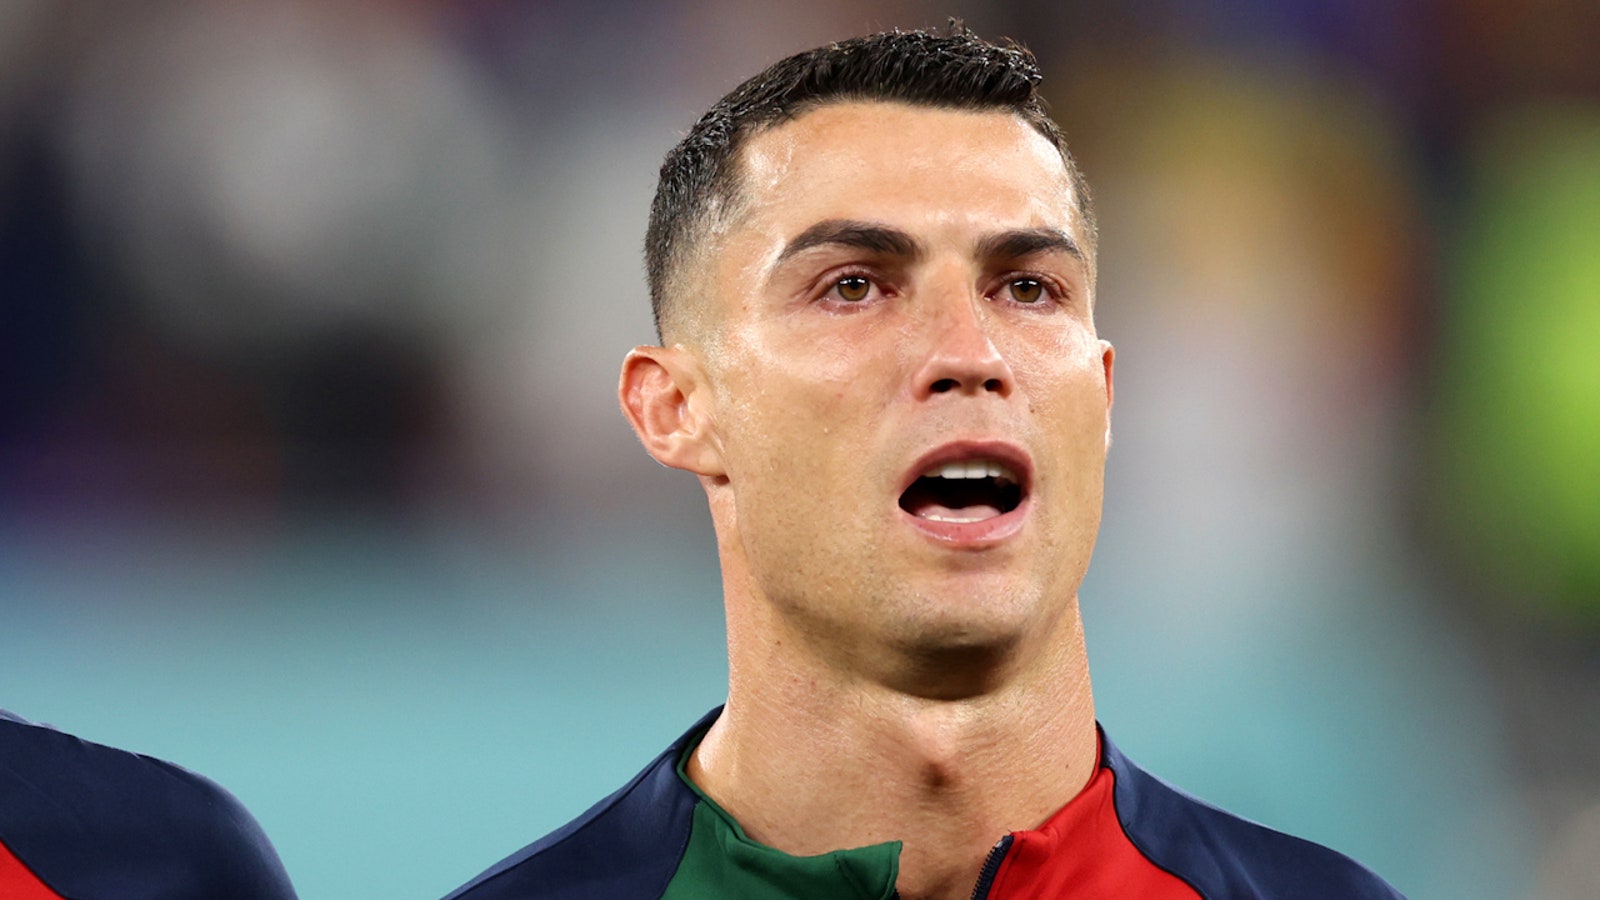 Cristiano Ronaldo cries during Portugal's national anthem